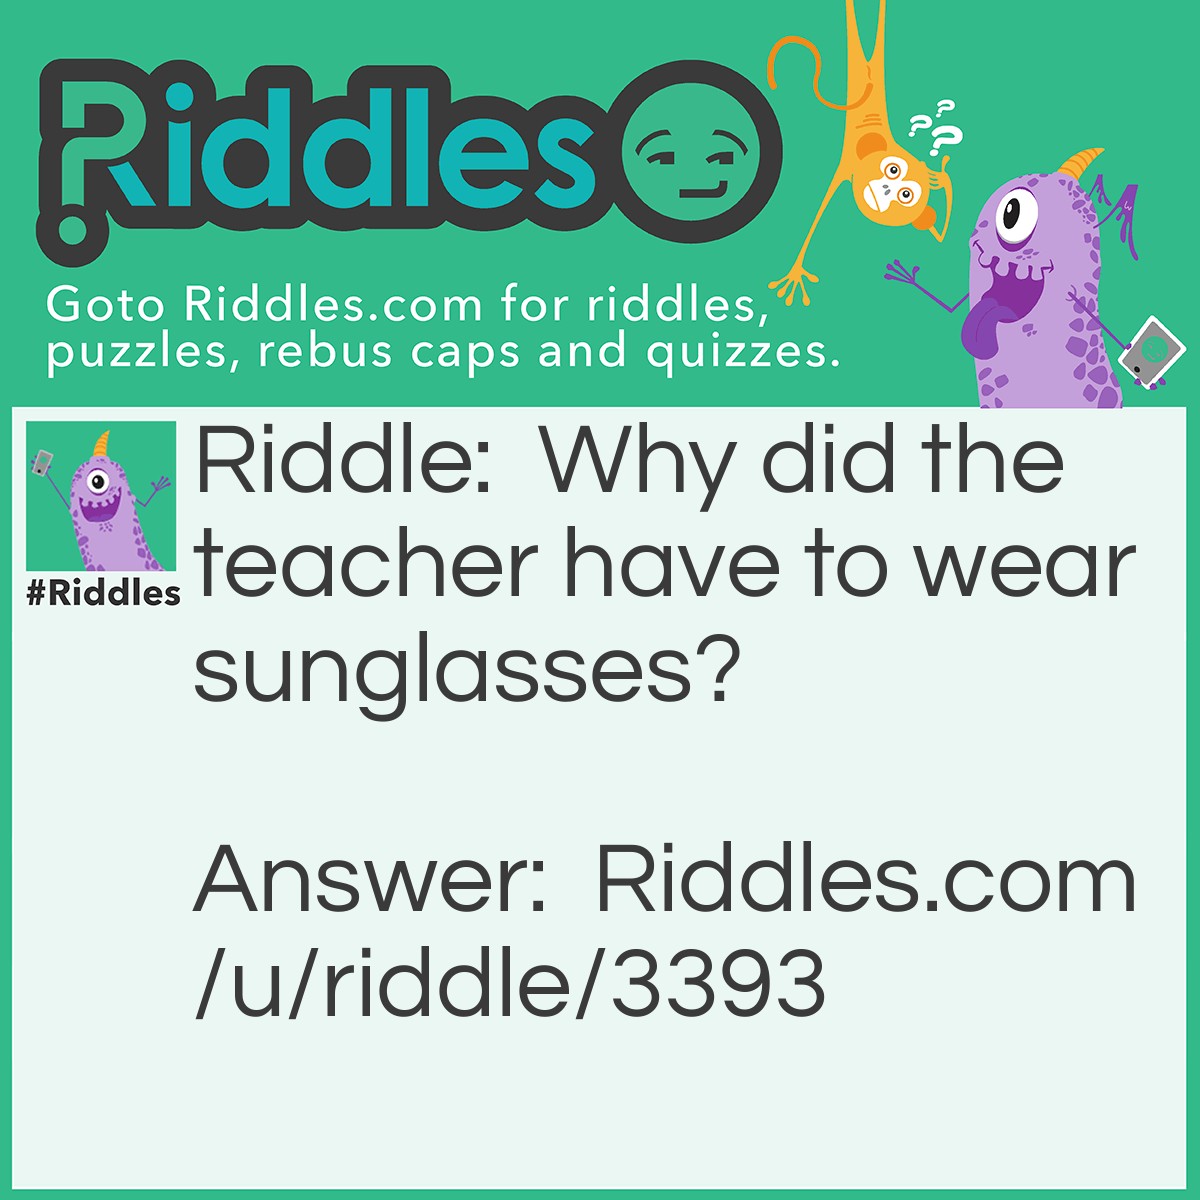 Riddle: Why did the teacher have to wear sunglasses? Answer: Because his pupils were so bright! :)